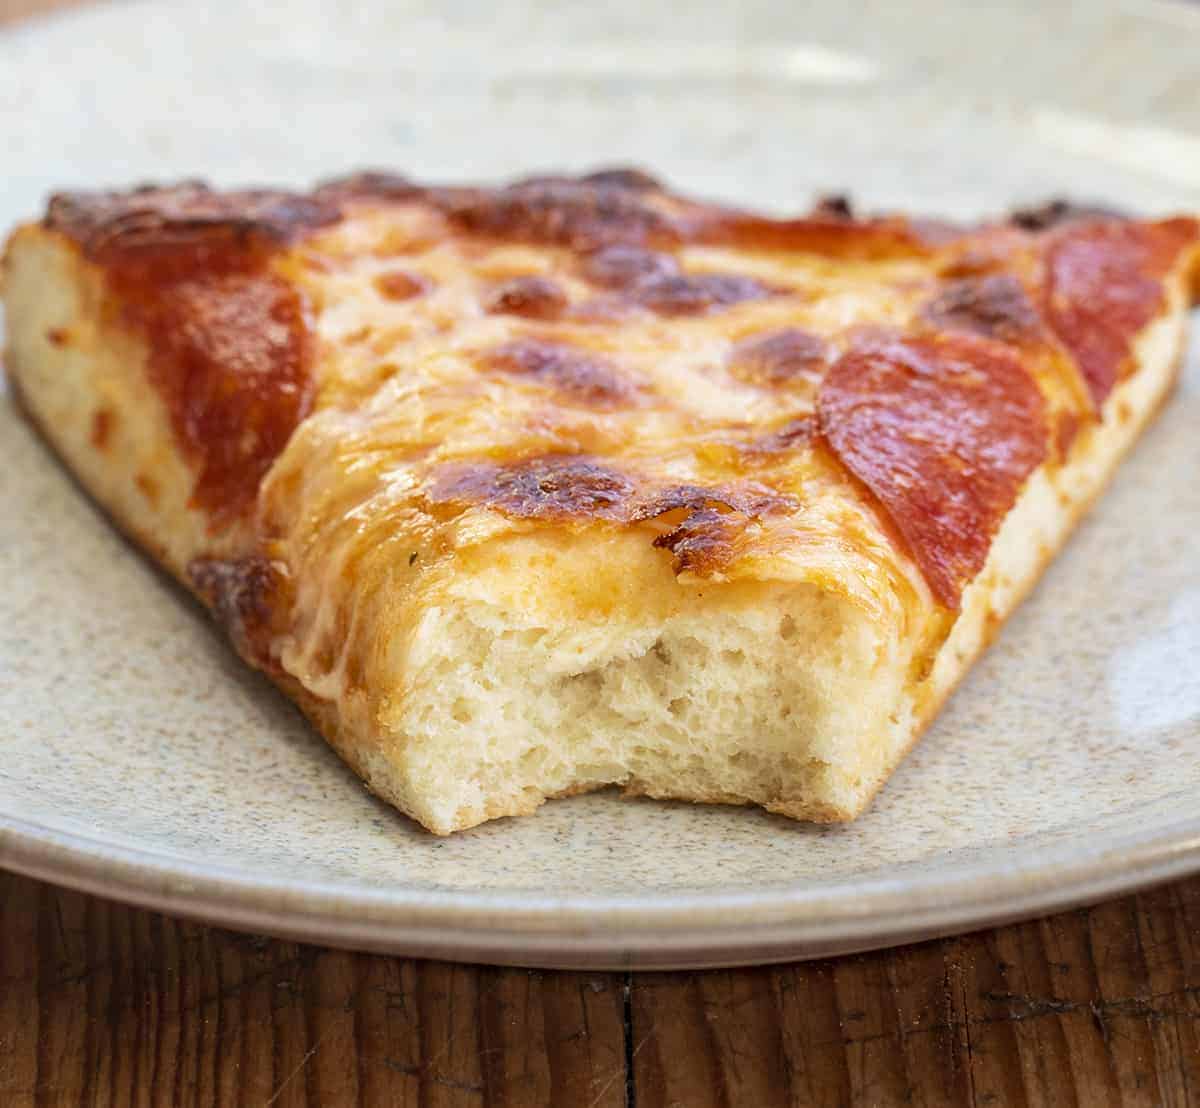 Piece of Pizza Showing Pizza Dough